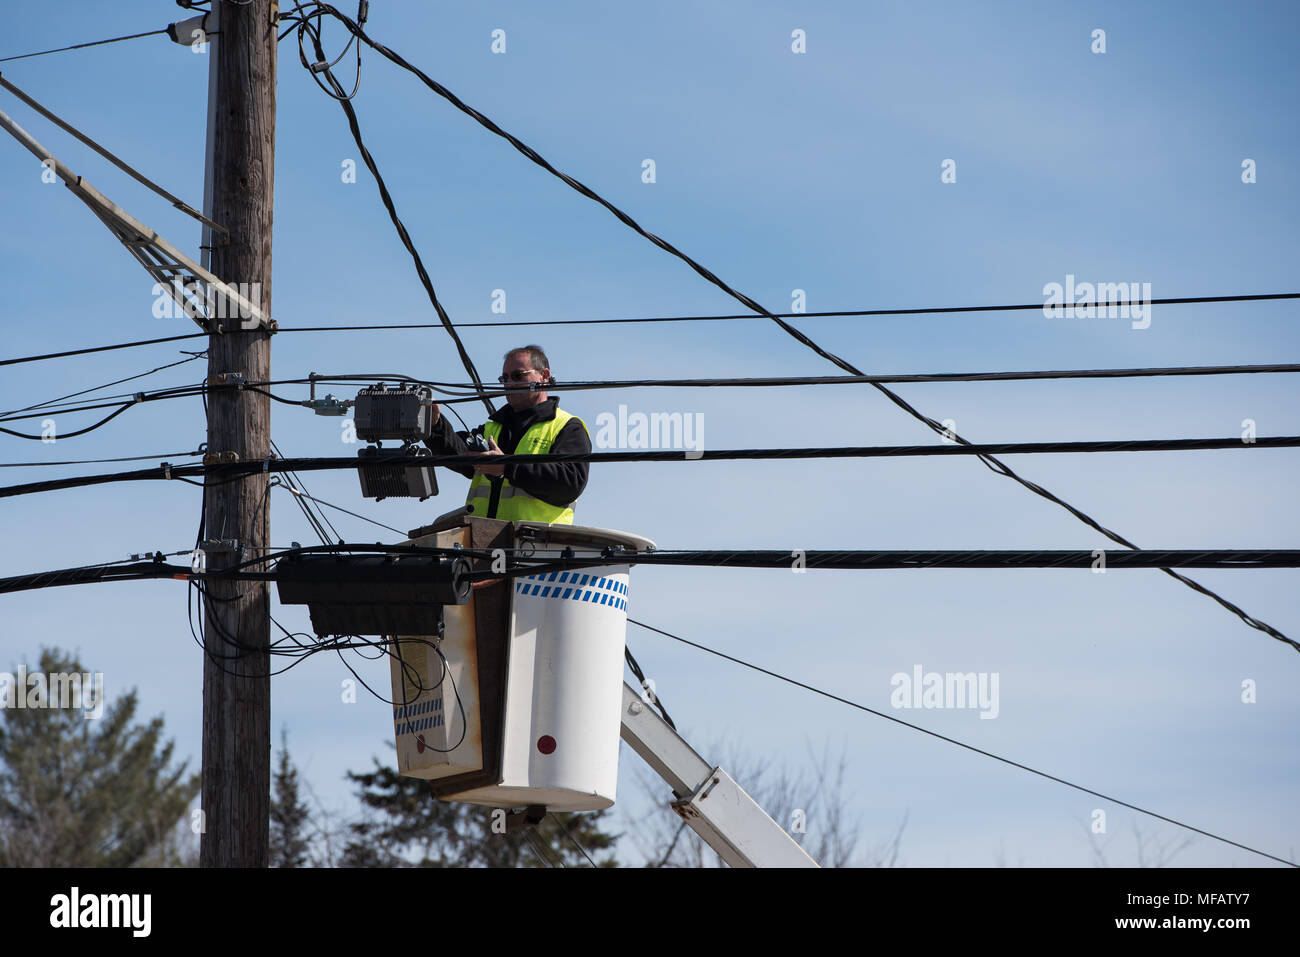 Man working on wires while standing in an aerial work platform, or lift bucket or bucket truck with a deep blue background. Stock Photo